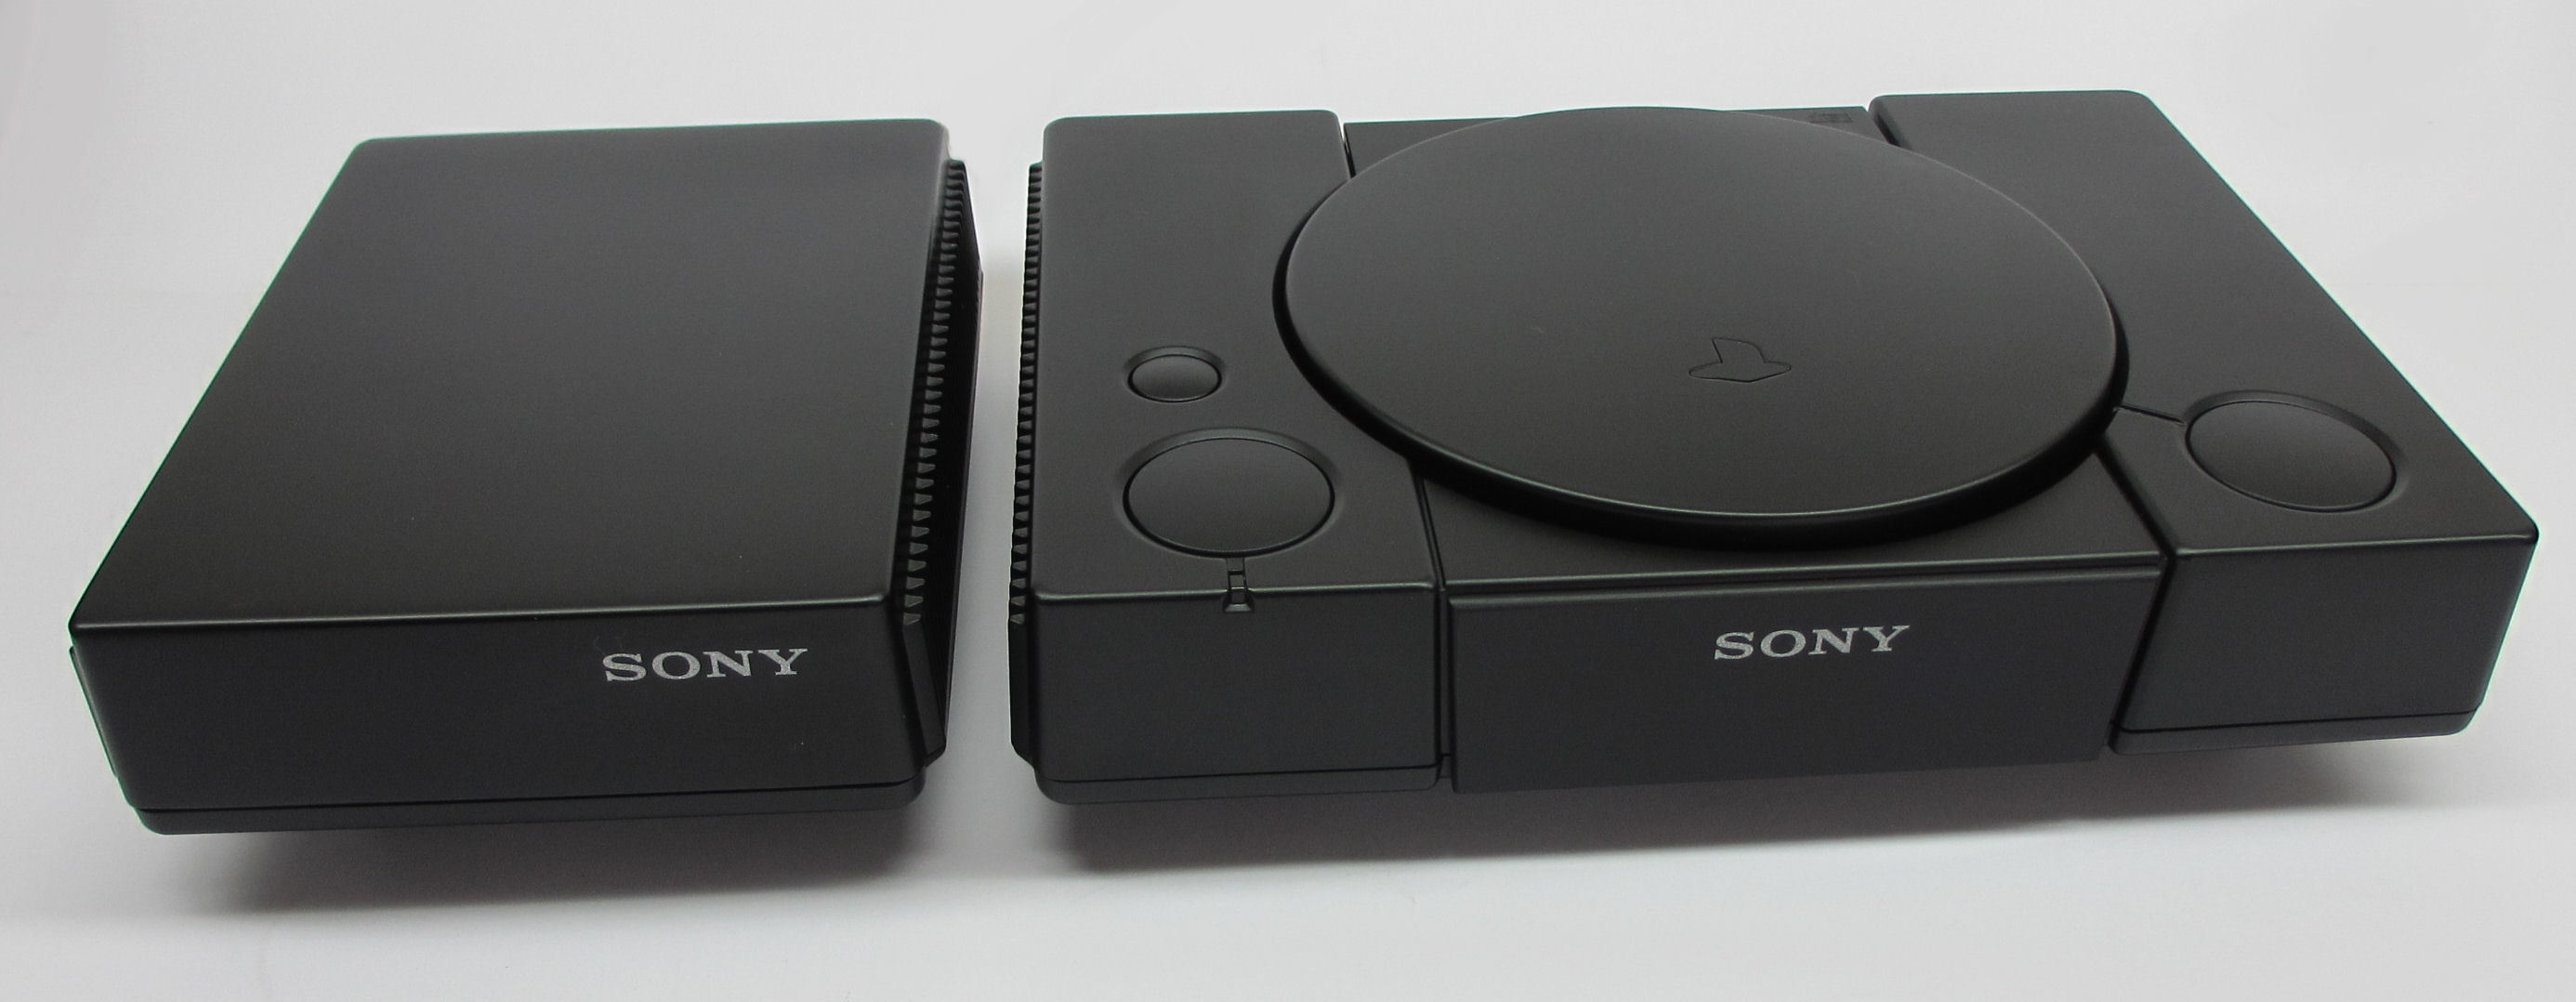 Пс 1а. Sony SCPH-1002. PLAYSTATION 1 SCPH-1002. Сони ПС 1. Sony PLAYSTATION SCPH-1000.